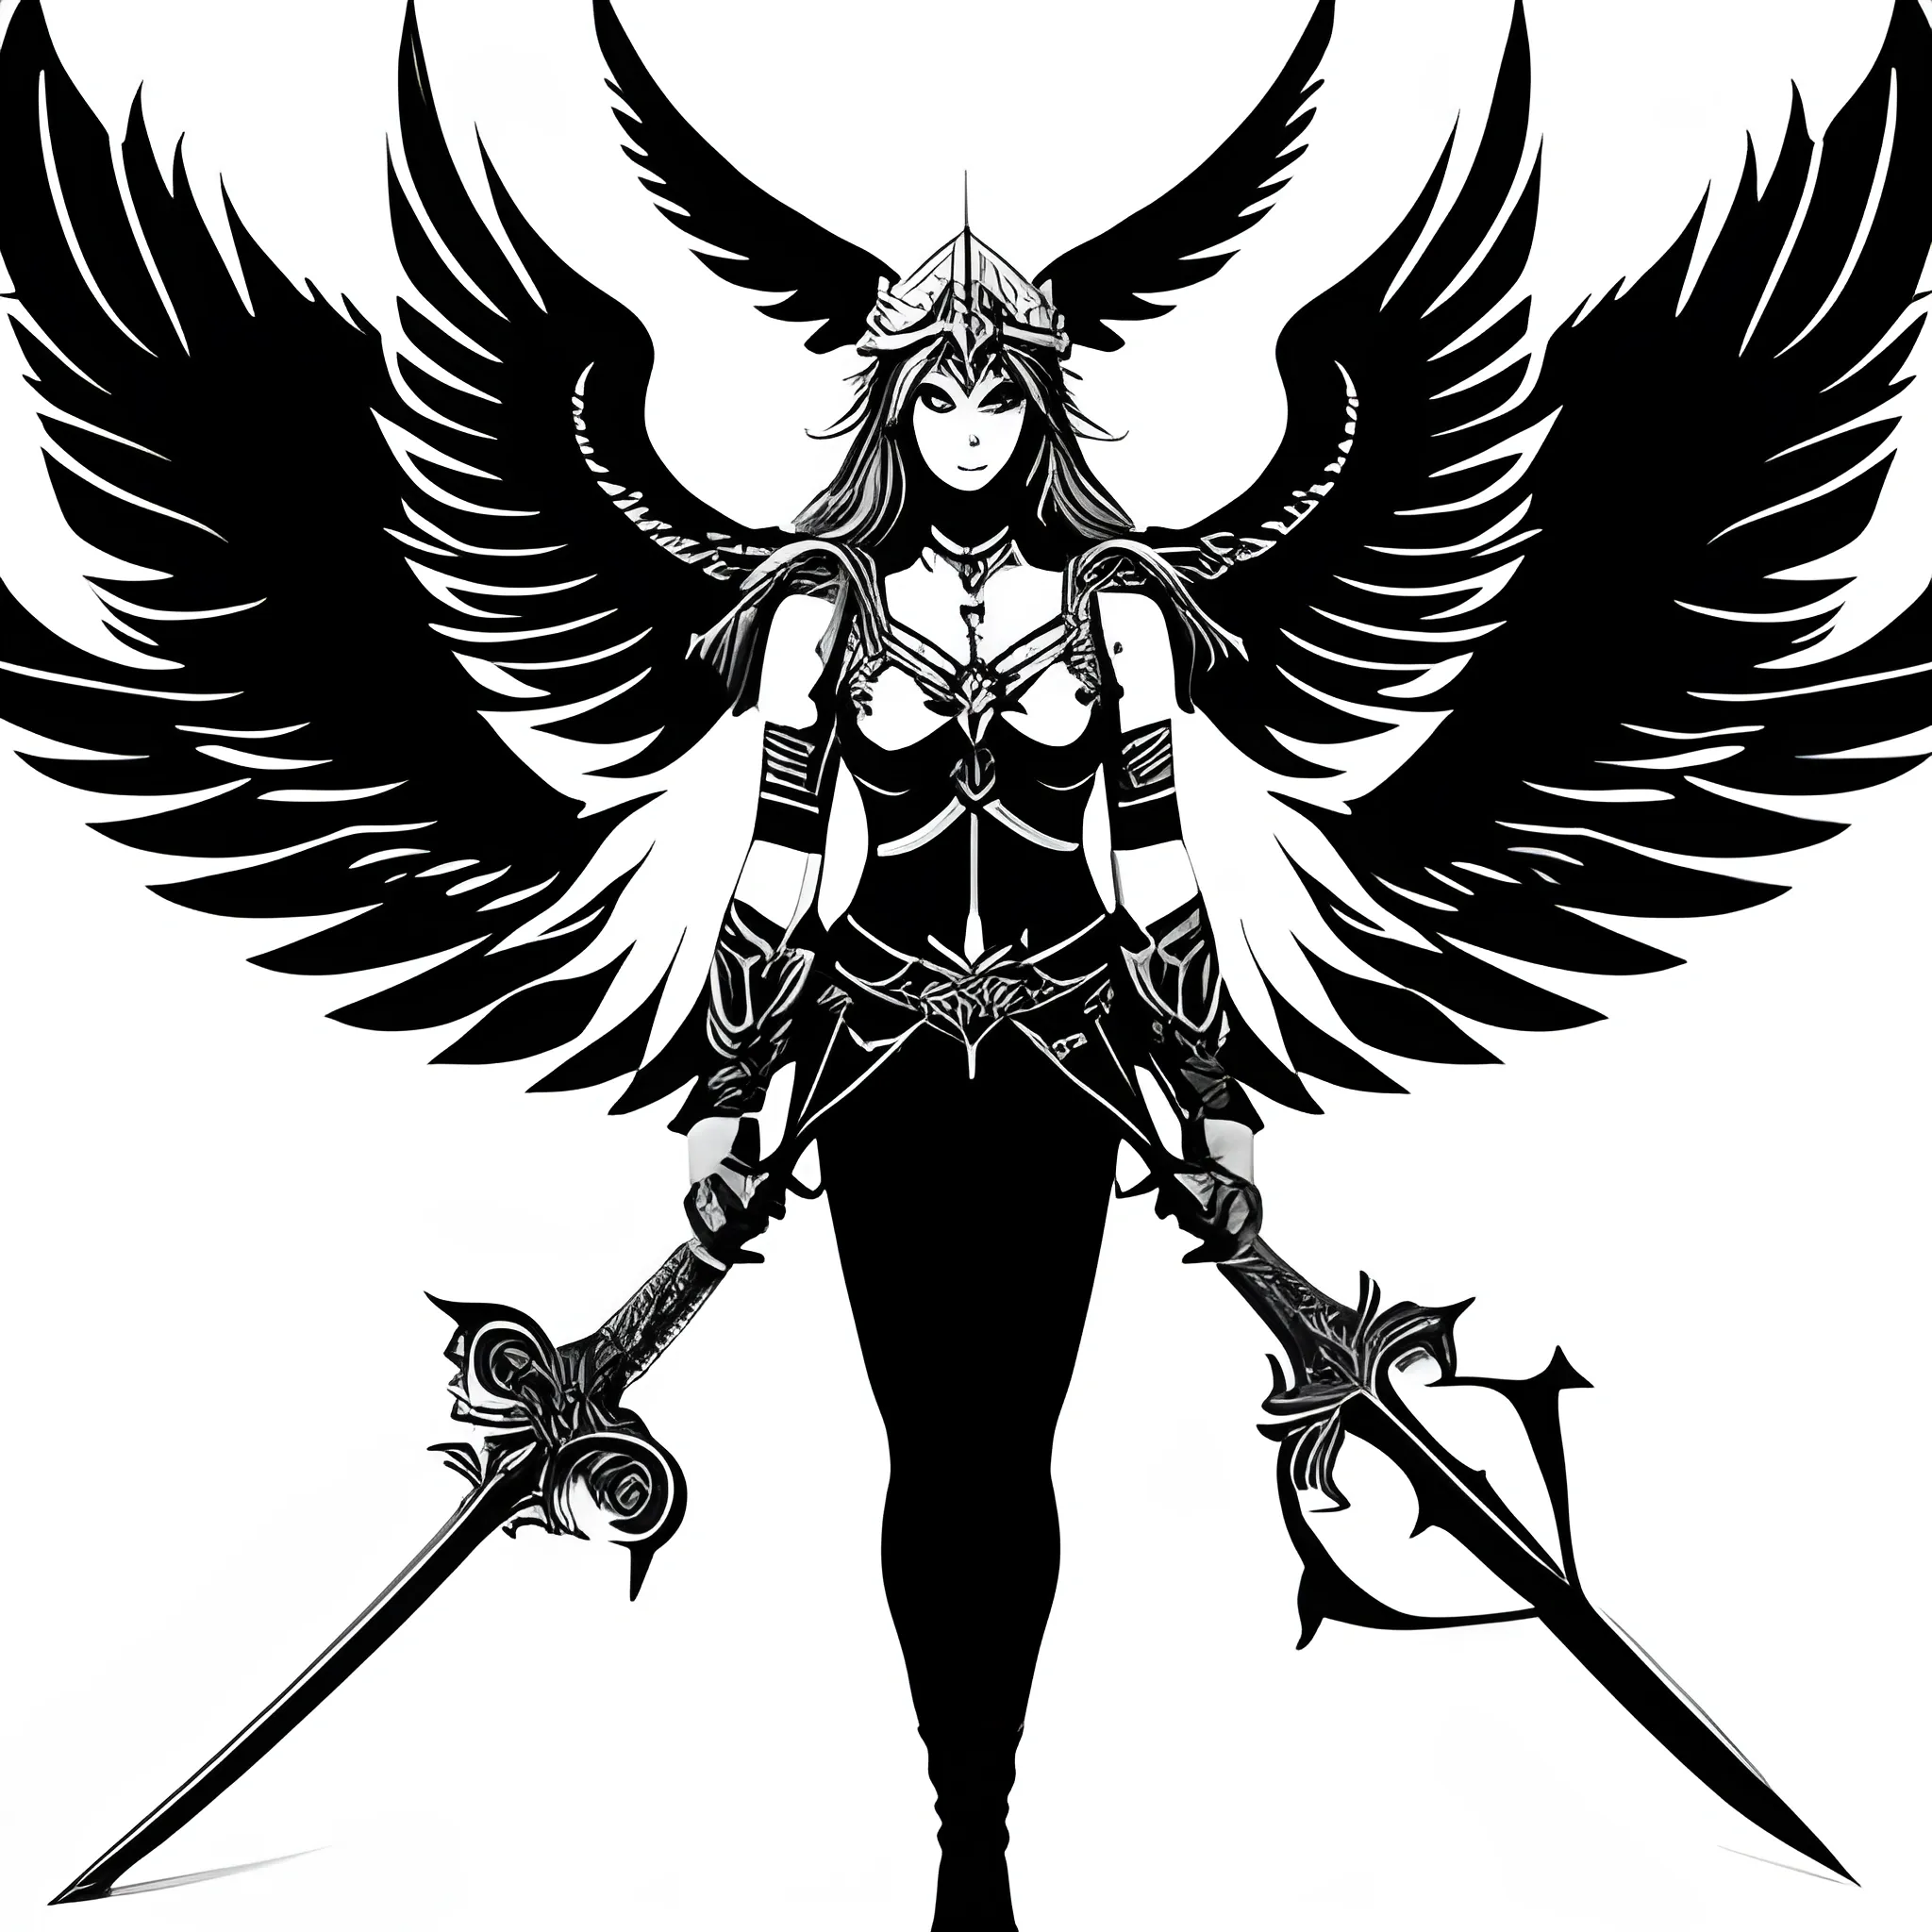 White Valkyrie woman logo, with sword, with wings, Black background